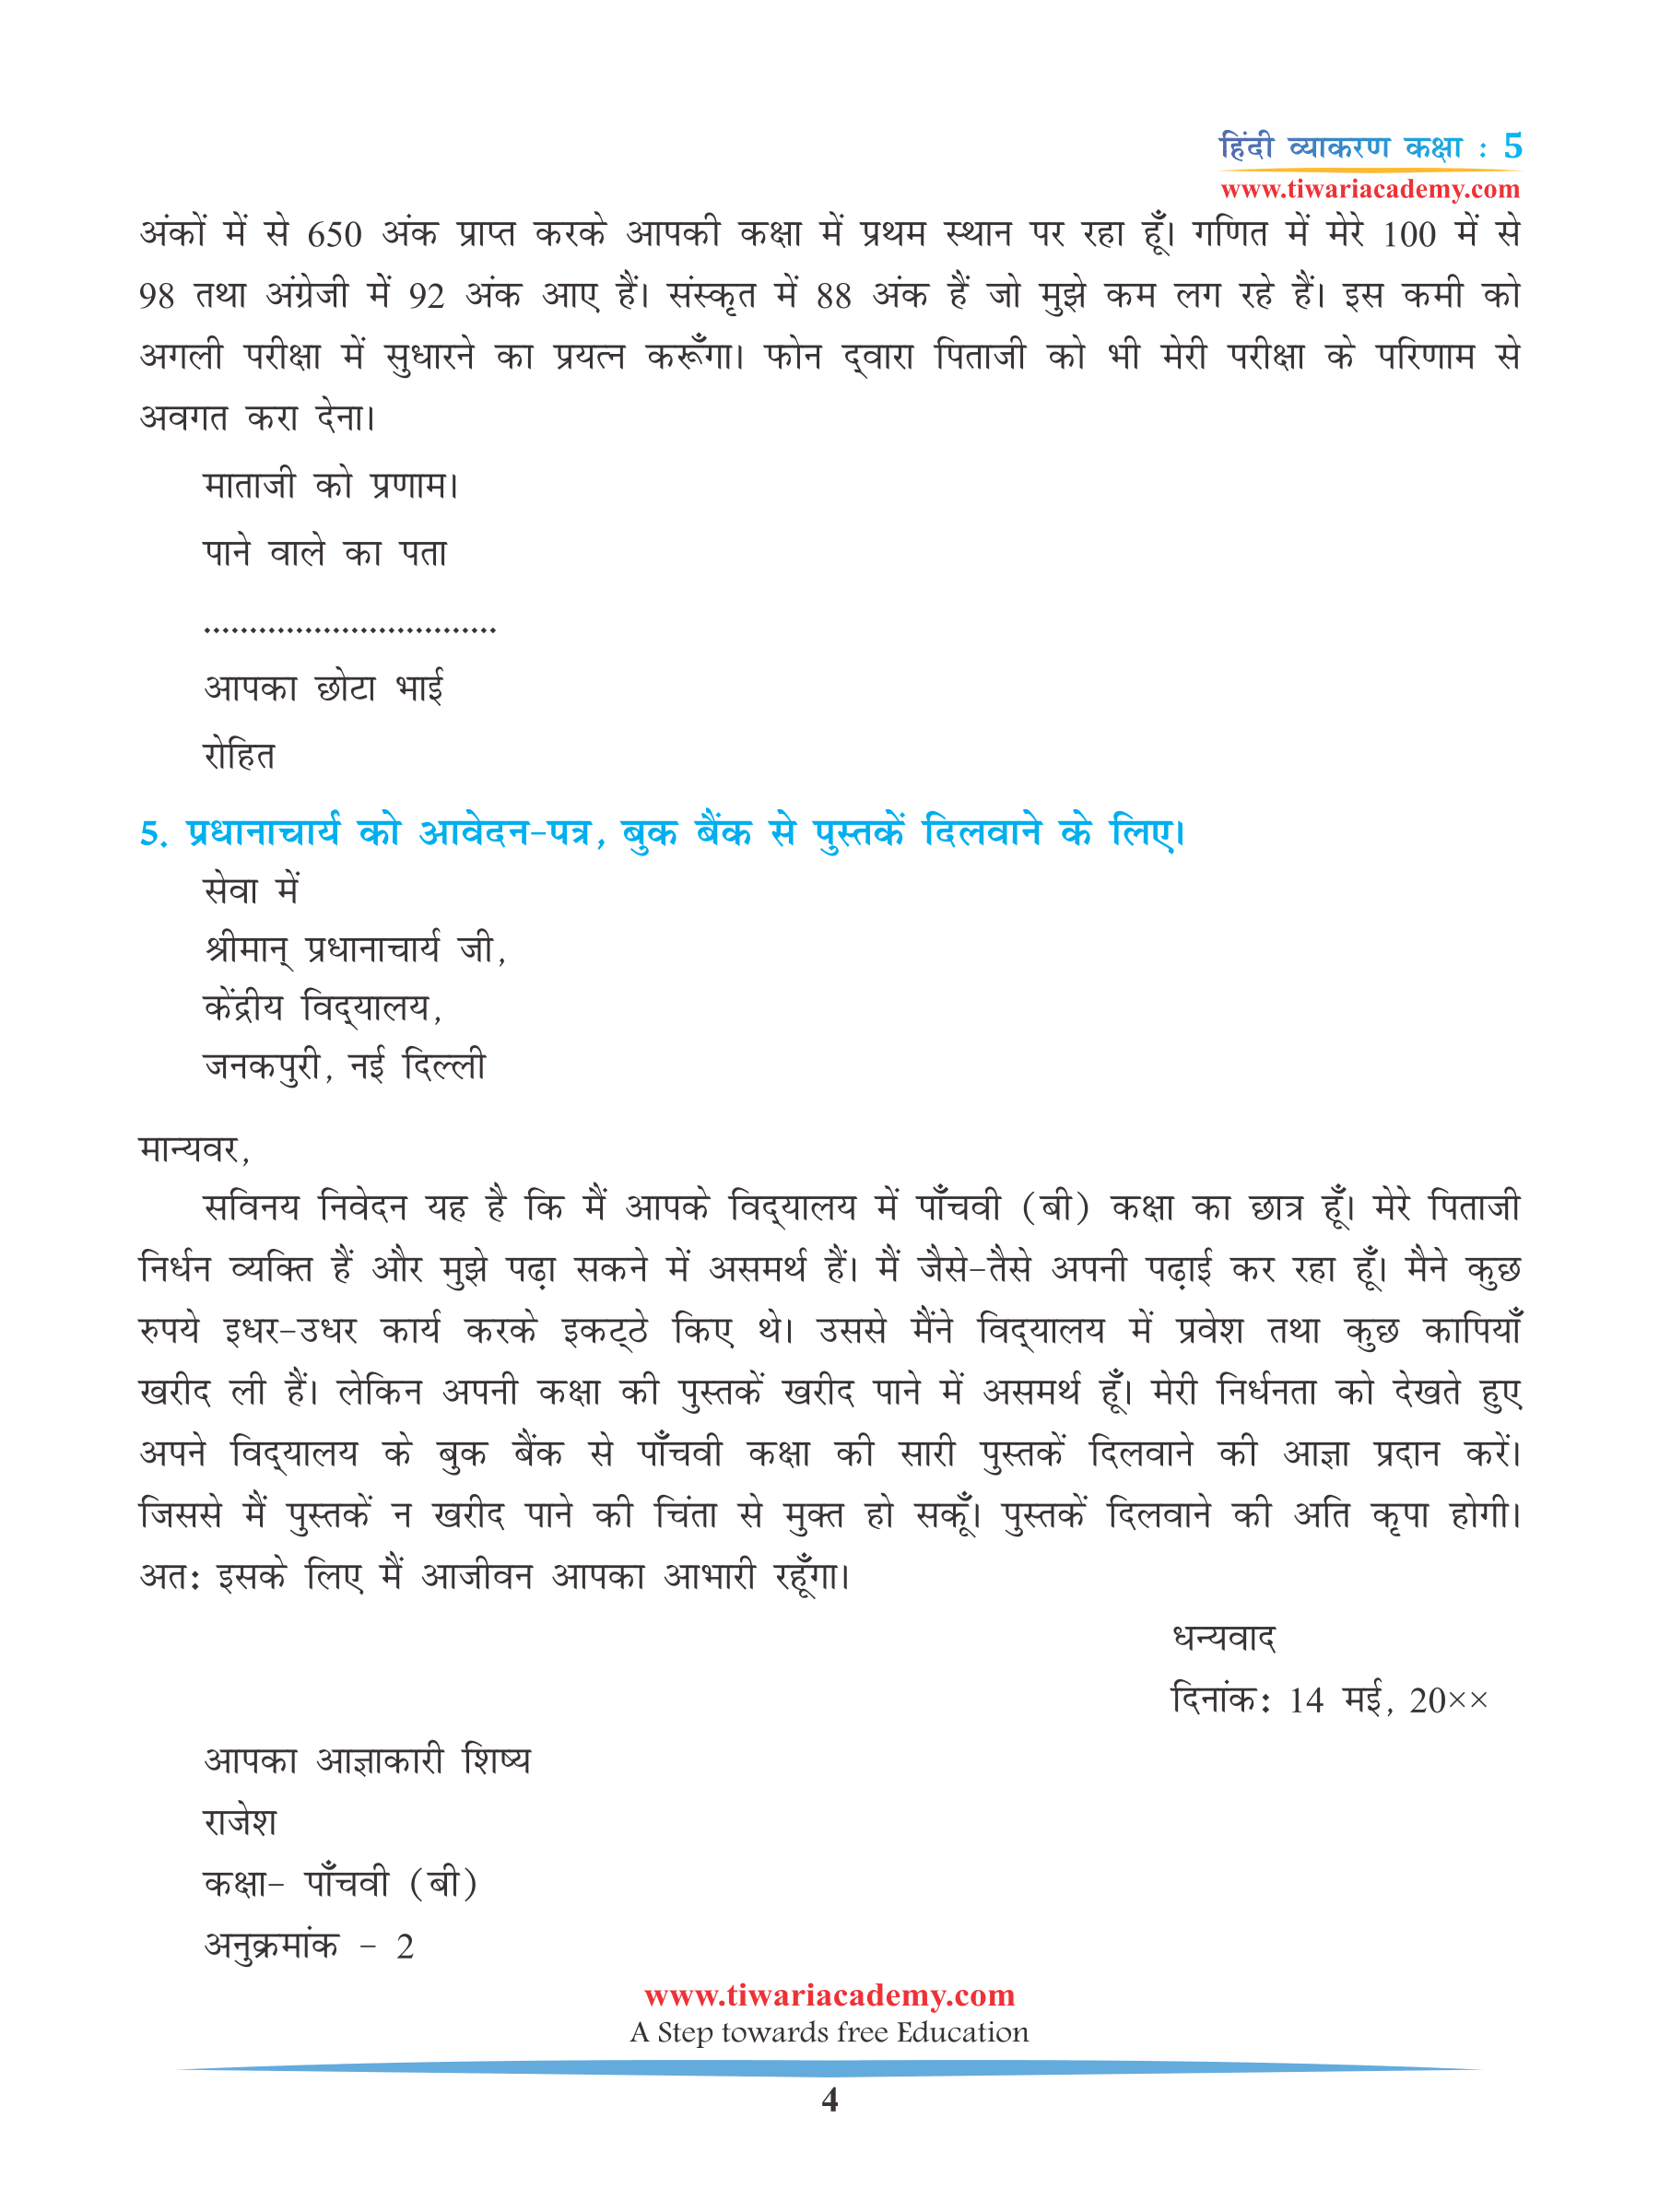 NCERT Solutions for Class 5 Hindi Grammar Chapter 20 in PDF